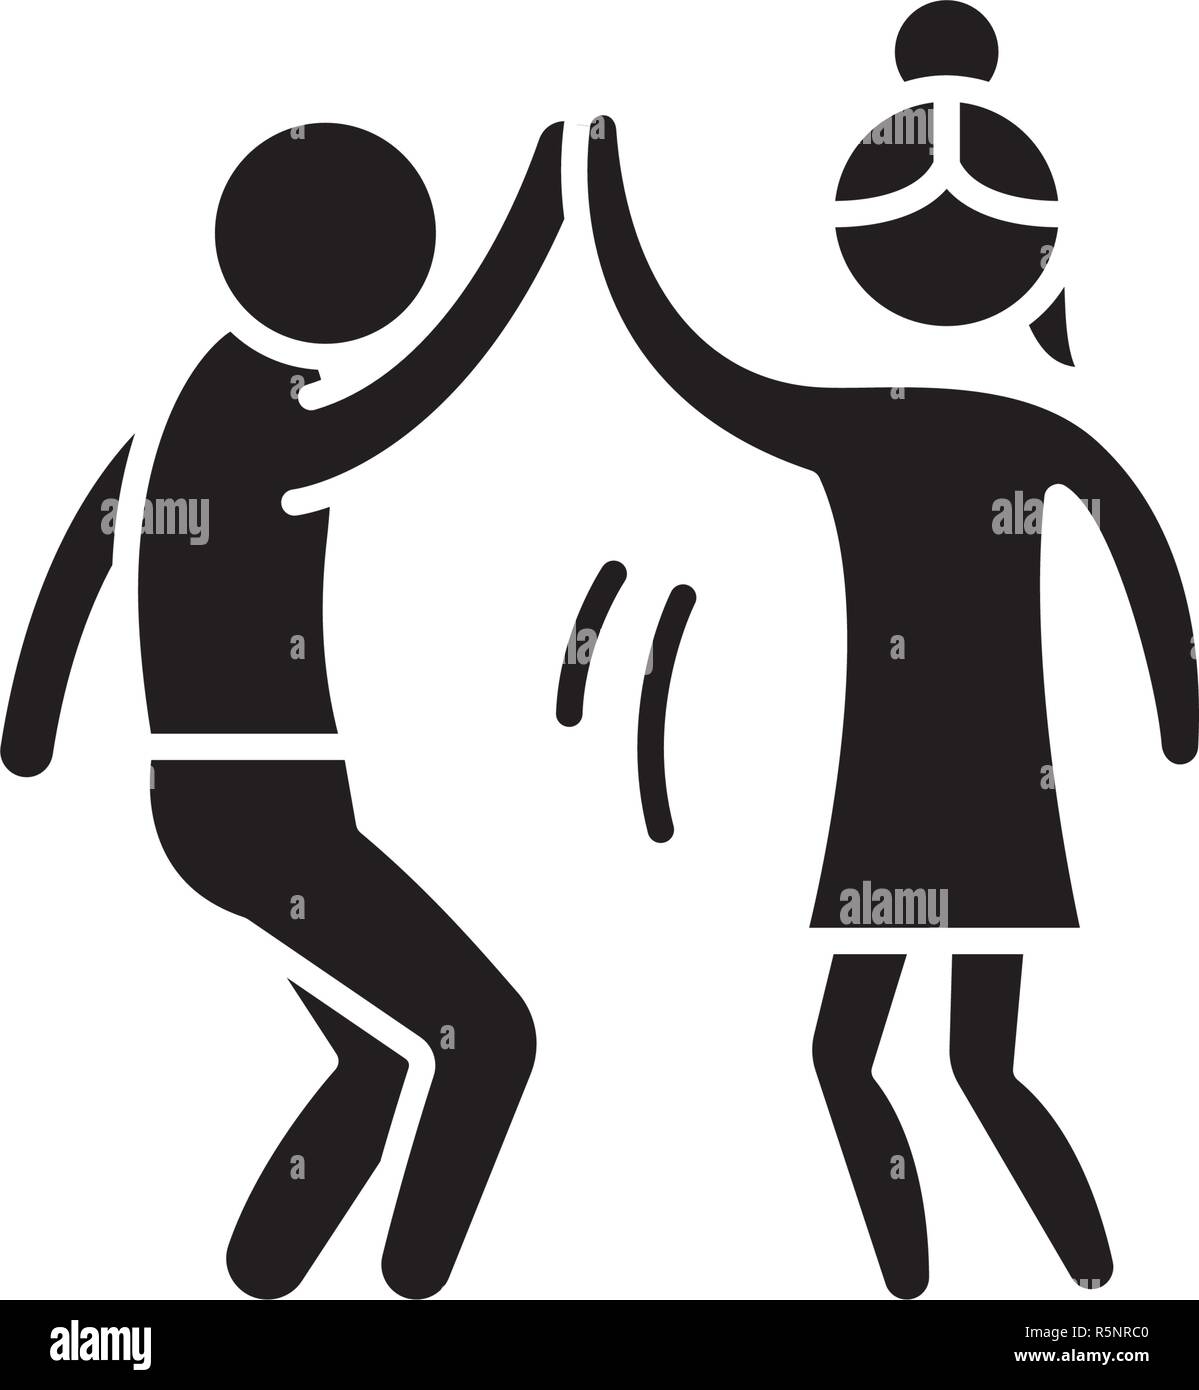 Man And Woman Are Dancing Black Icon Vector Sign On Isolated Background Man And Woman Are Dancing Concept Symbol Illustration Stock Vector Image Art Alamy Browse our icon dancing images, graphics, and designs from +79.322 free vectors graphics. https www alamy com man and woman are dancing black icon vector sign on isolated background man and woman are dancing concept symbol illustration image227287424 html